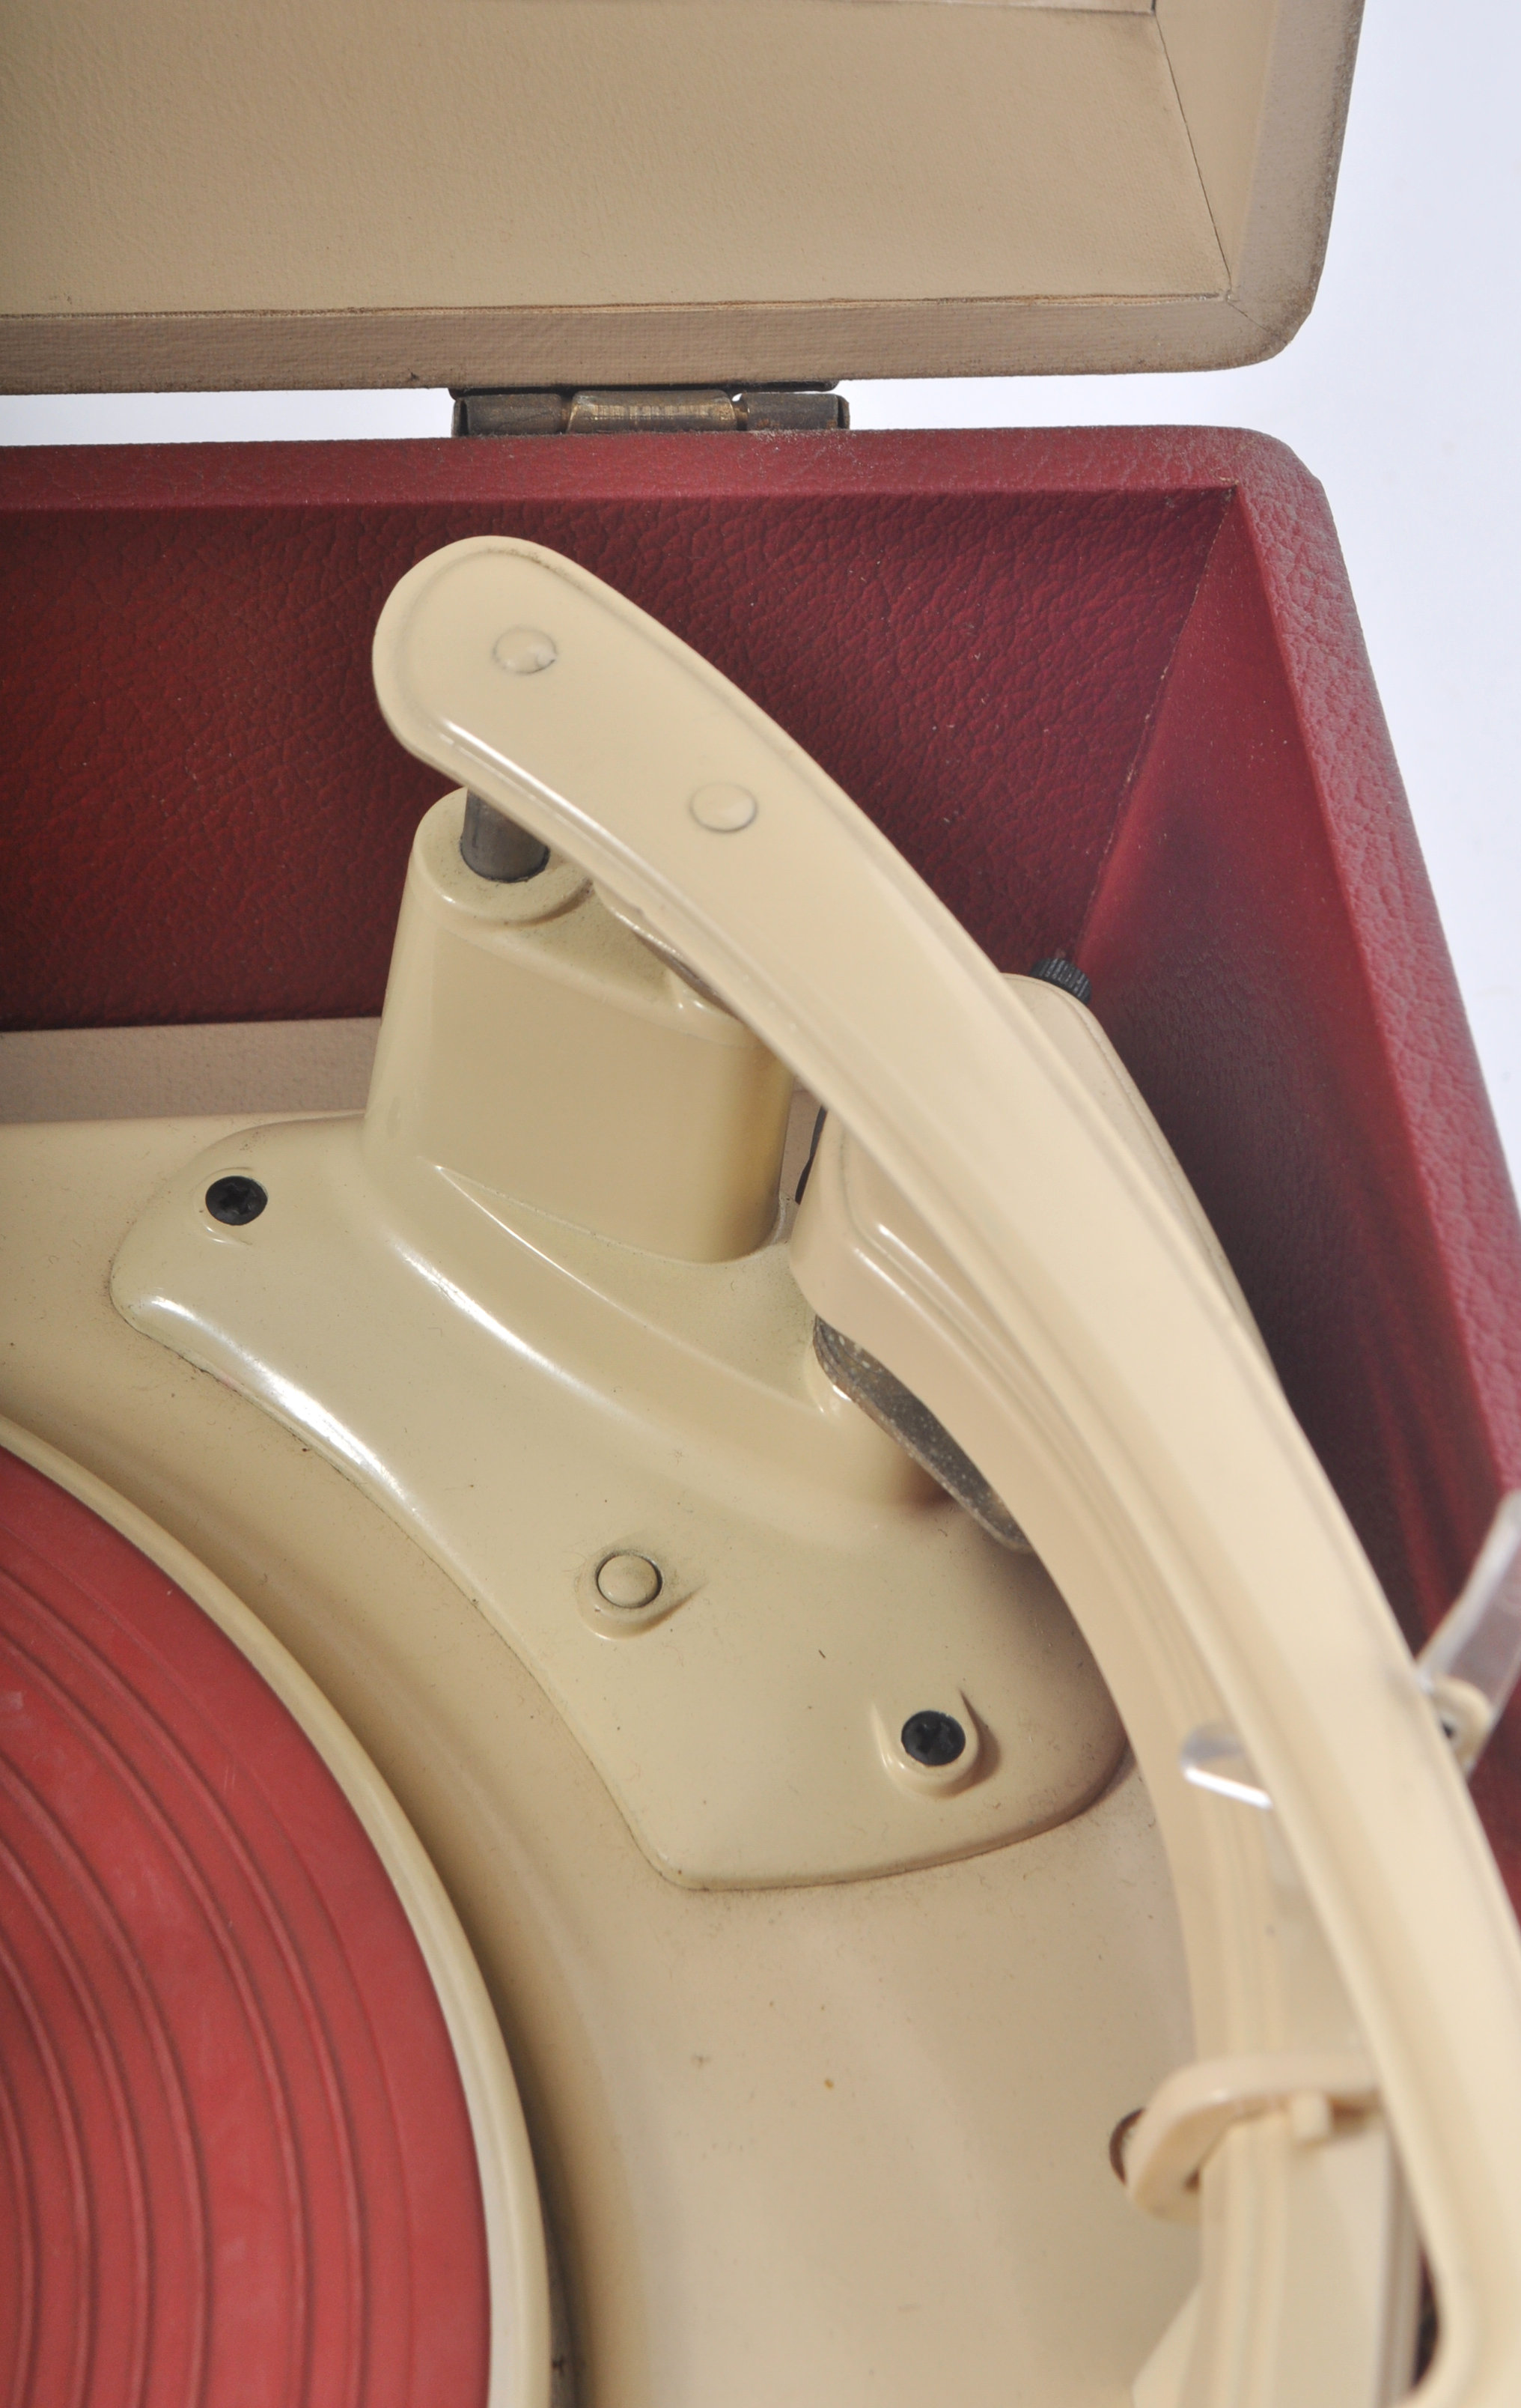 HMV PORTABLE RECORD PLAYER SET WITH A GARRARD TURNTABLE - Image 4 of 8